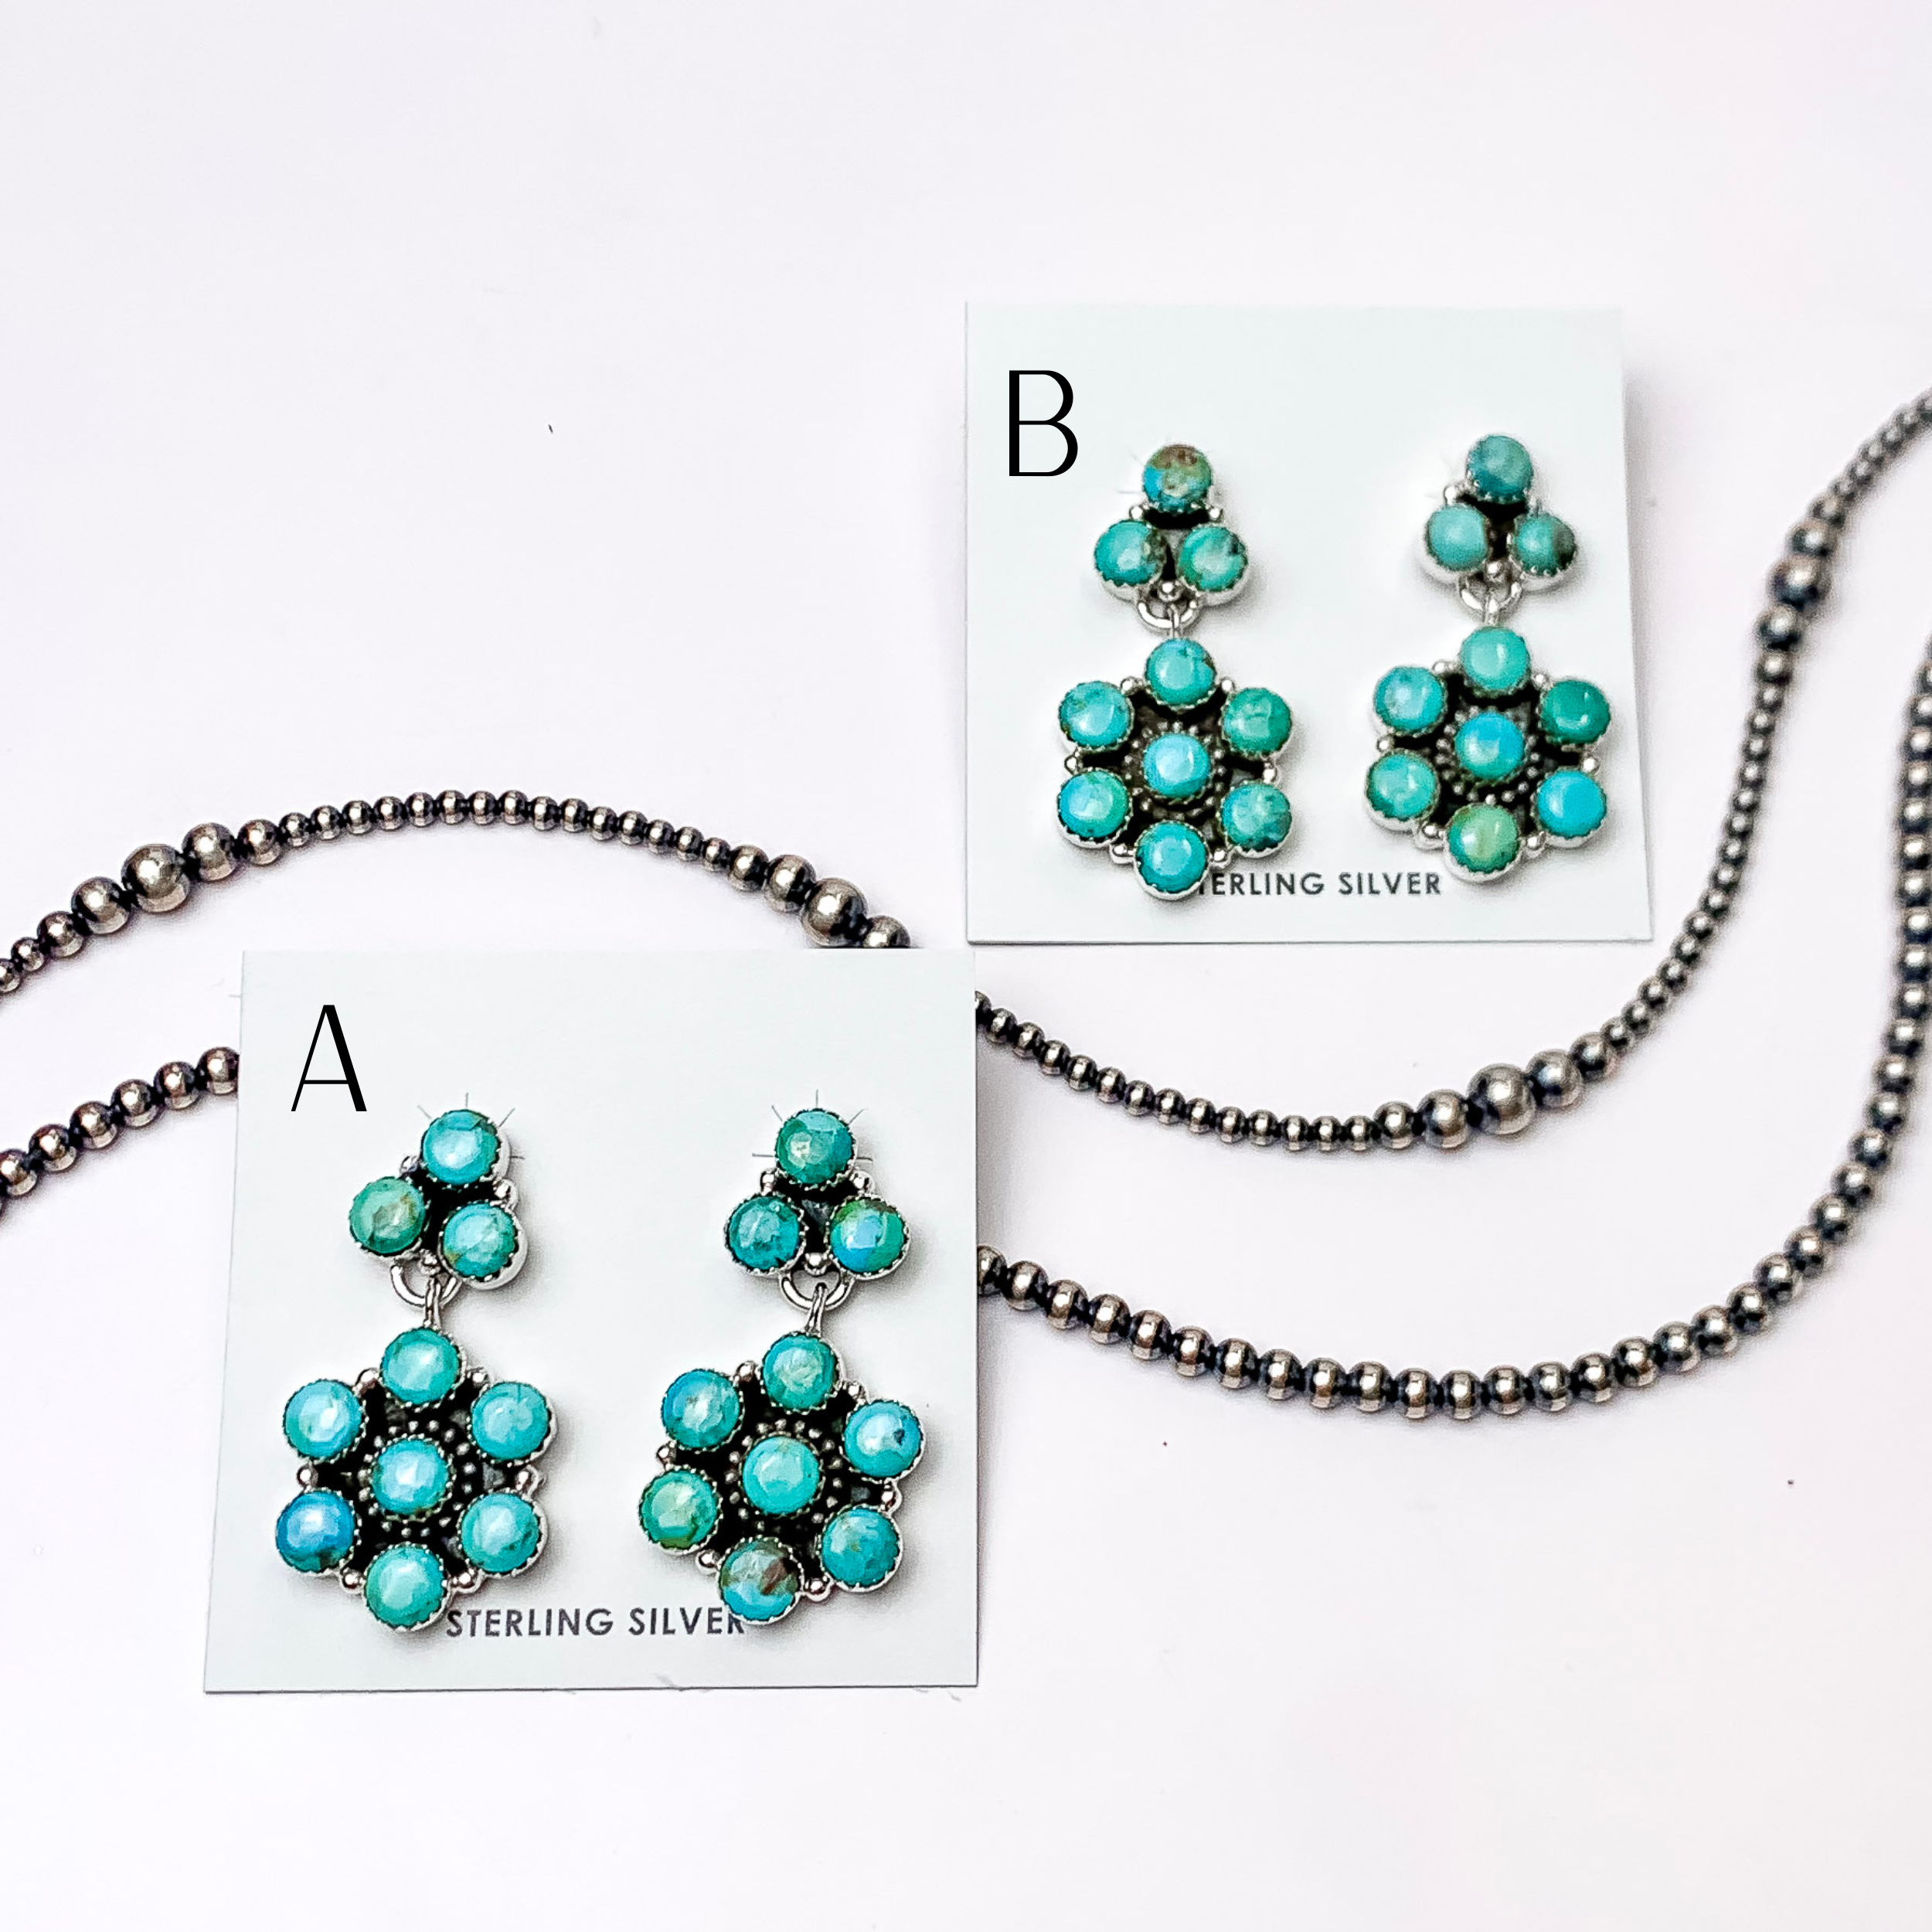 Hada Collection | Handmade Sterling Silver Cluster Drop Earrings with Kingman Turquoise Stones - Giddy Up Glamour Boutique